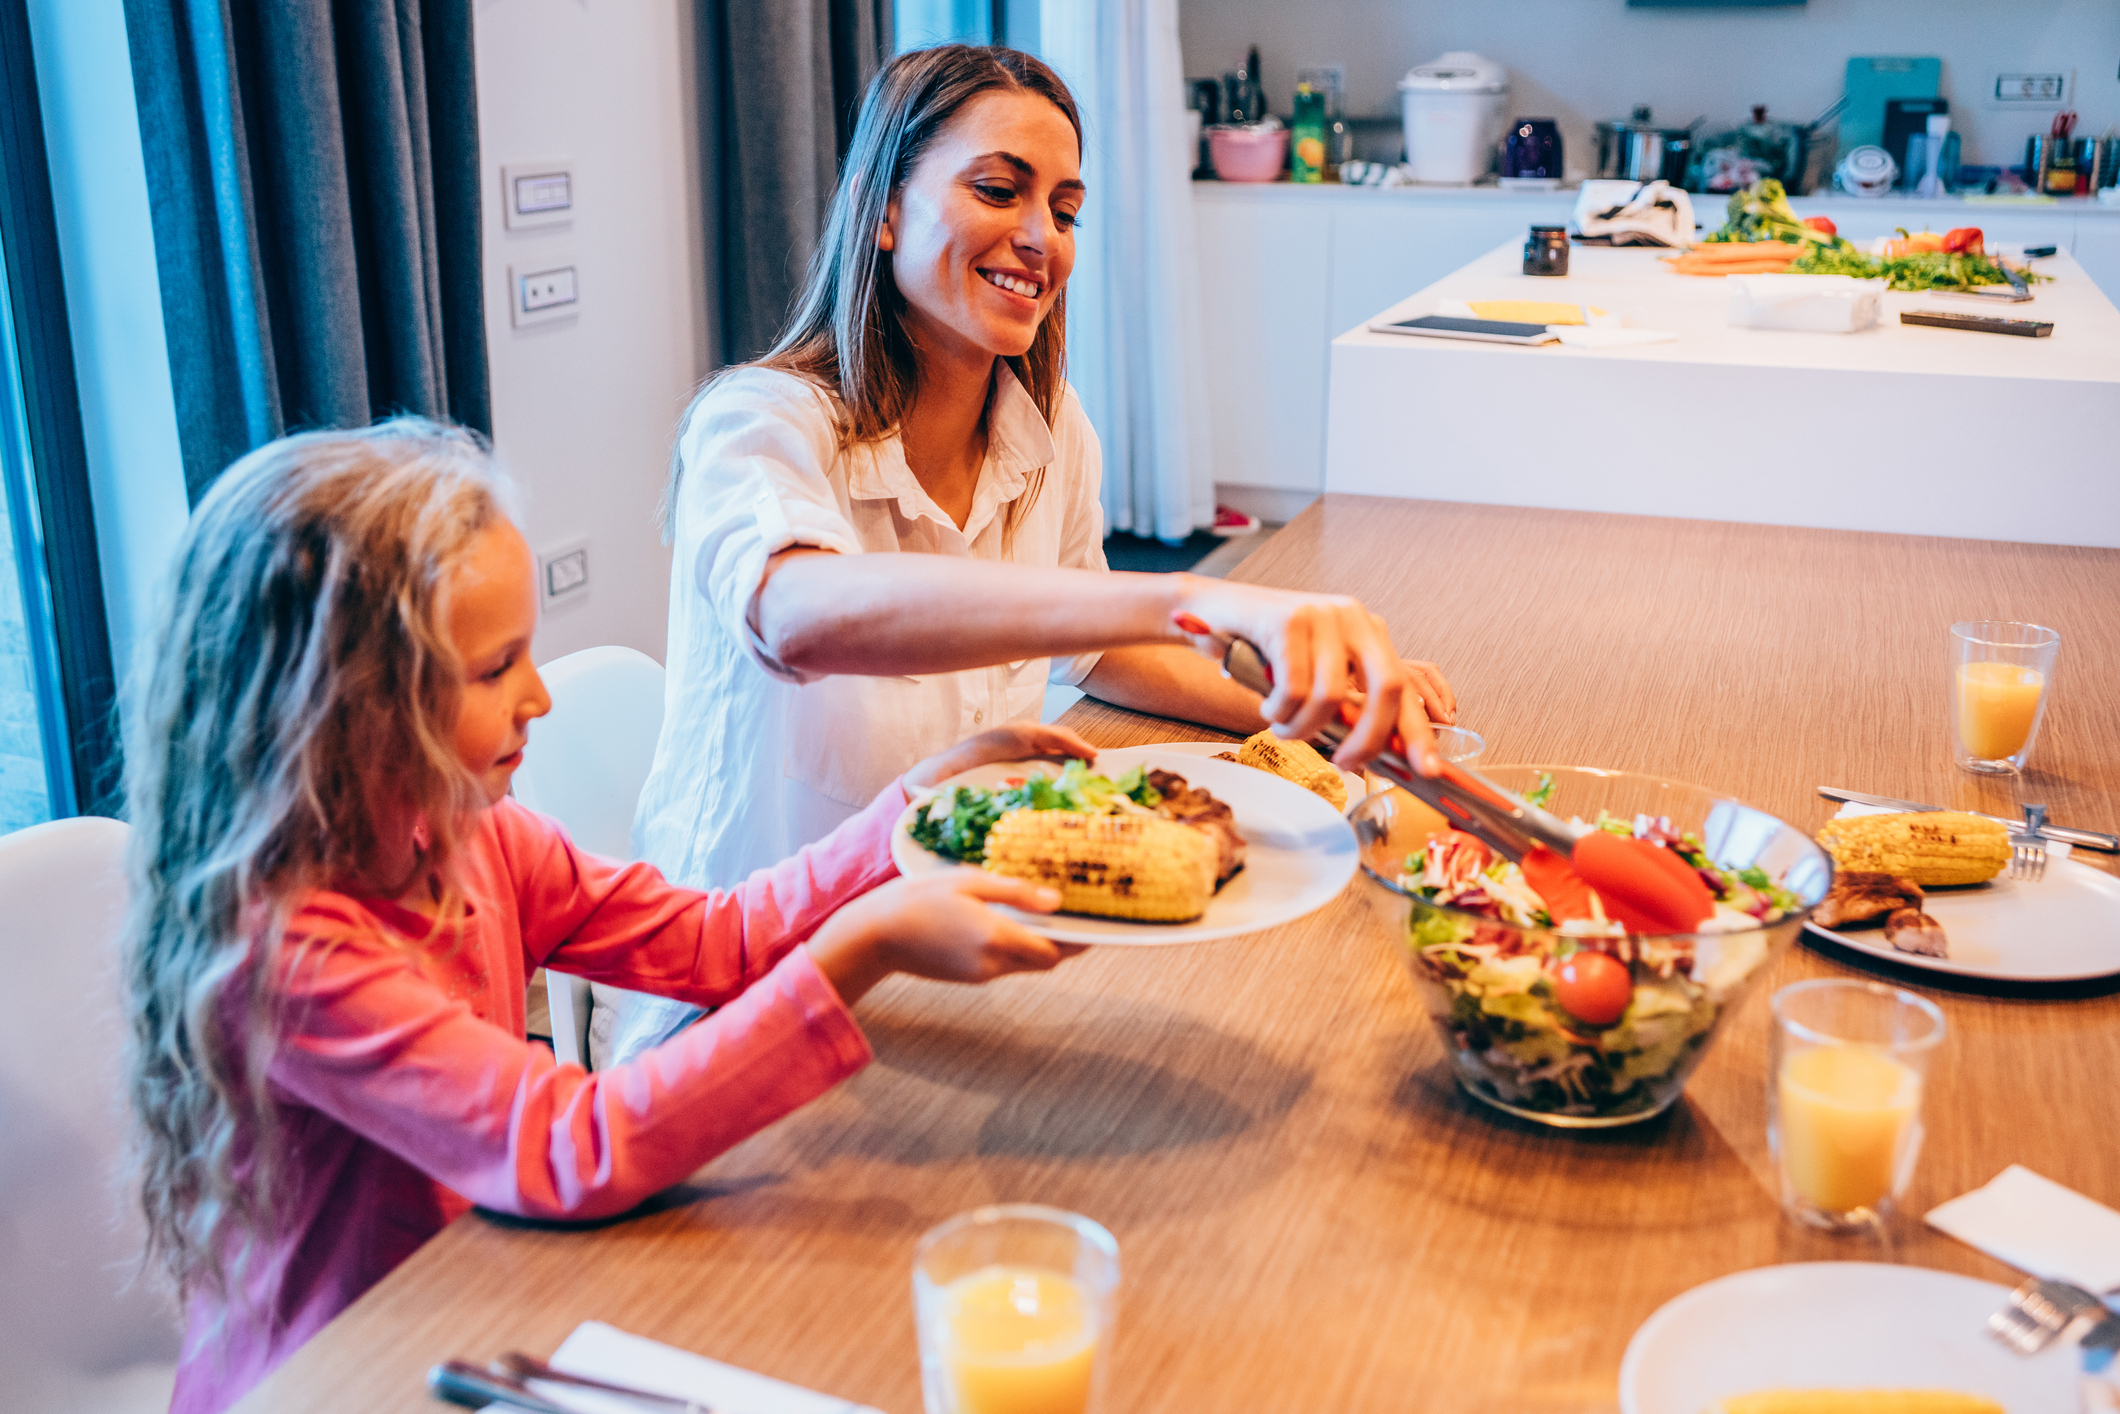 Mom and child enjoying a meal at a dining table, passing food, smiling together